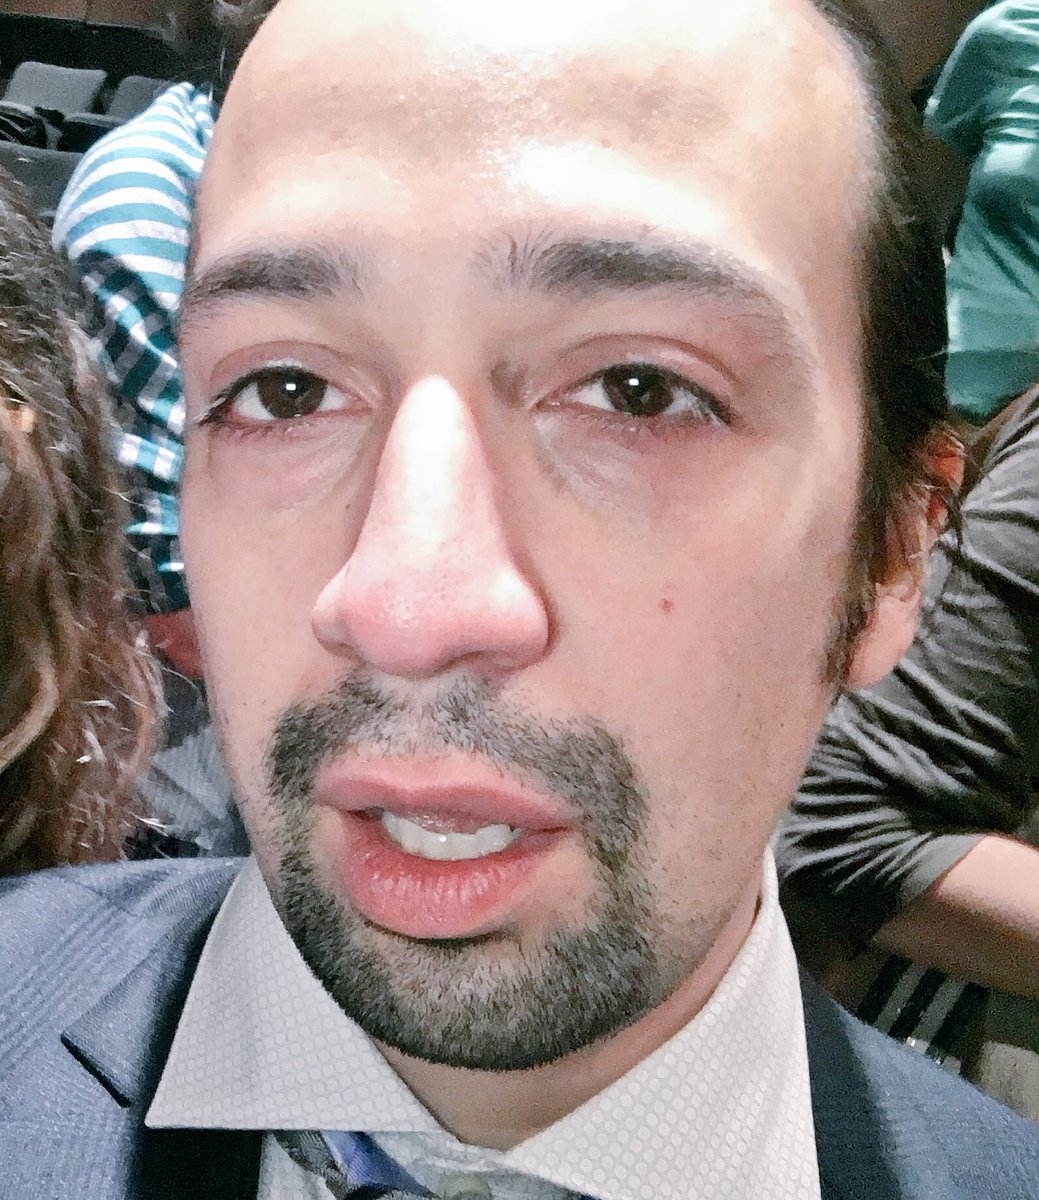 RT @Lin_Manuel: 2) this is my face after Daphne's Dive, wrecked from happy sobbing. https://t.co/DQSmxKXYld